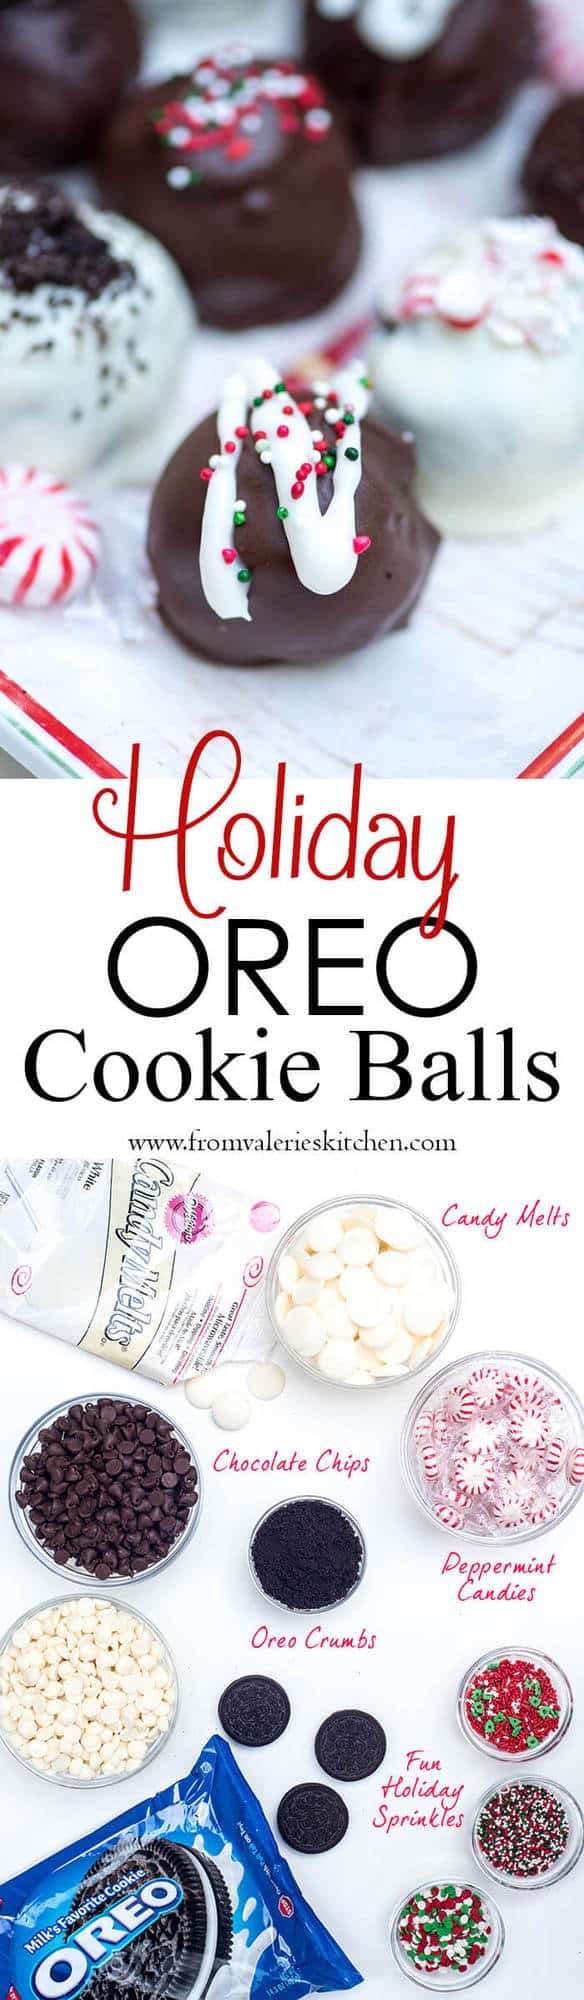 Holiday Oreo Cookie Ball ingredients and the finished balls with text overlay.